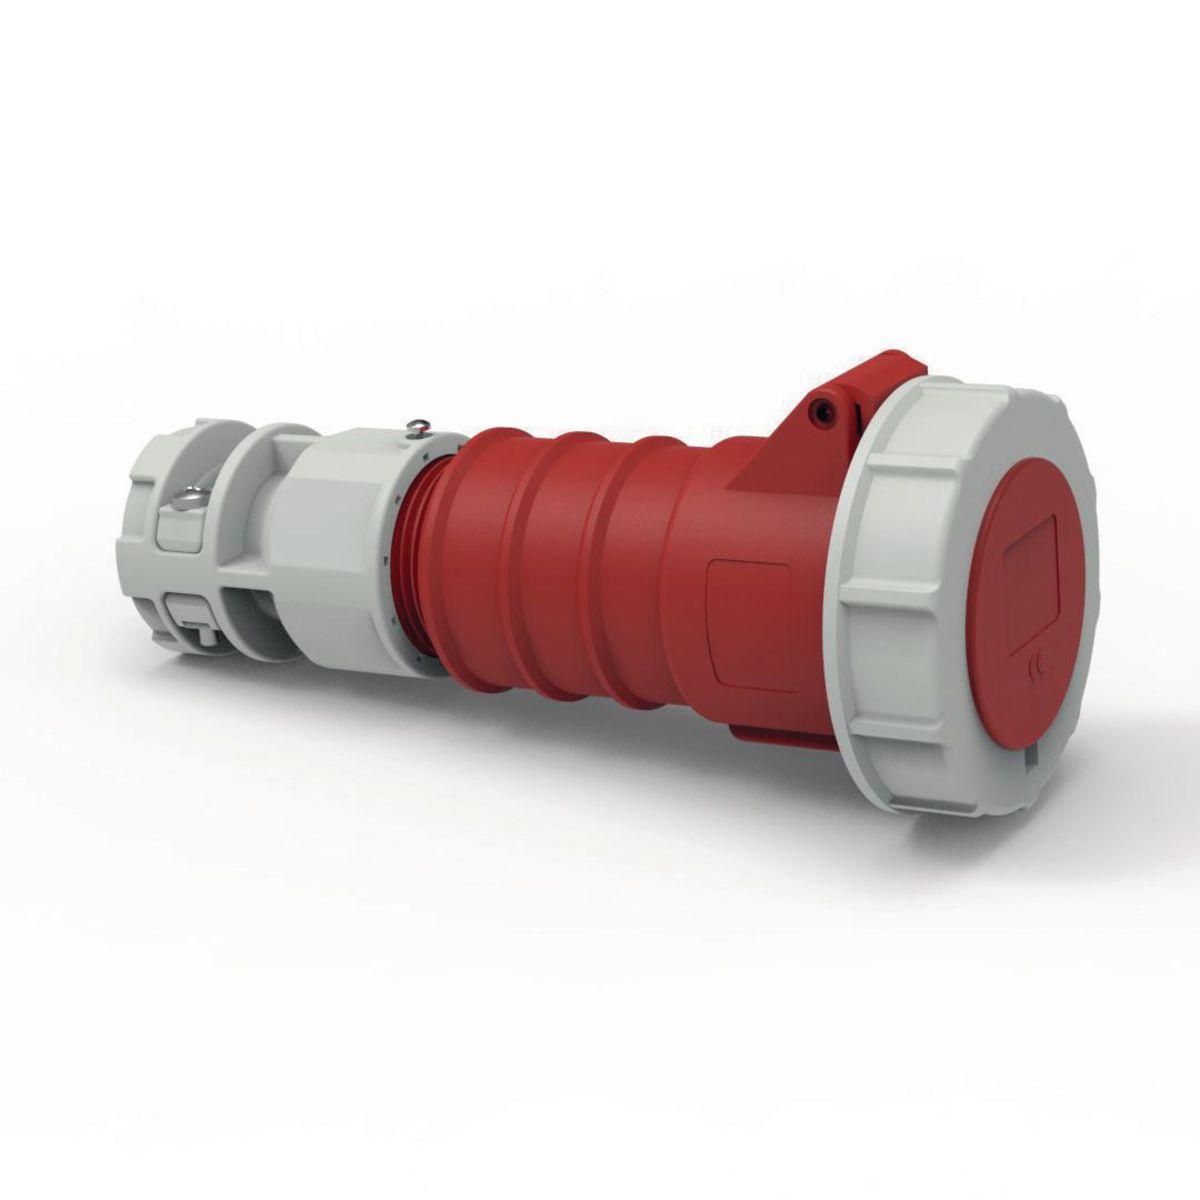 Hubbell C330C7WA Heavy Duty Products, IEC Pin and Sleeve Devices, Hubbell-PRO, Female, Connector Body, 30 A 480 VAC, 2-POLE 3-WIRE, Red, Watertight  ; IP67 environmental ratings ; Impact and corrosion resistant insulated non-metallic housing ; Sequential contact engagemen